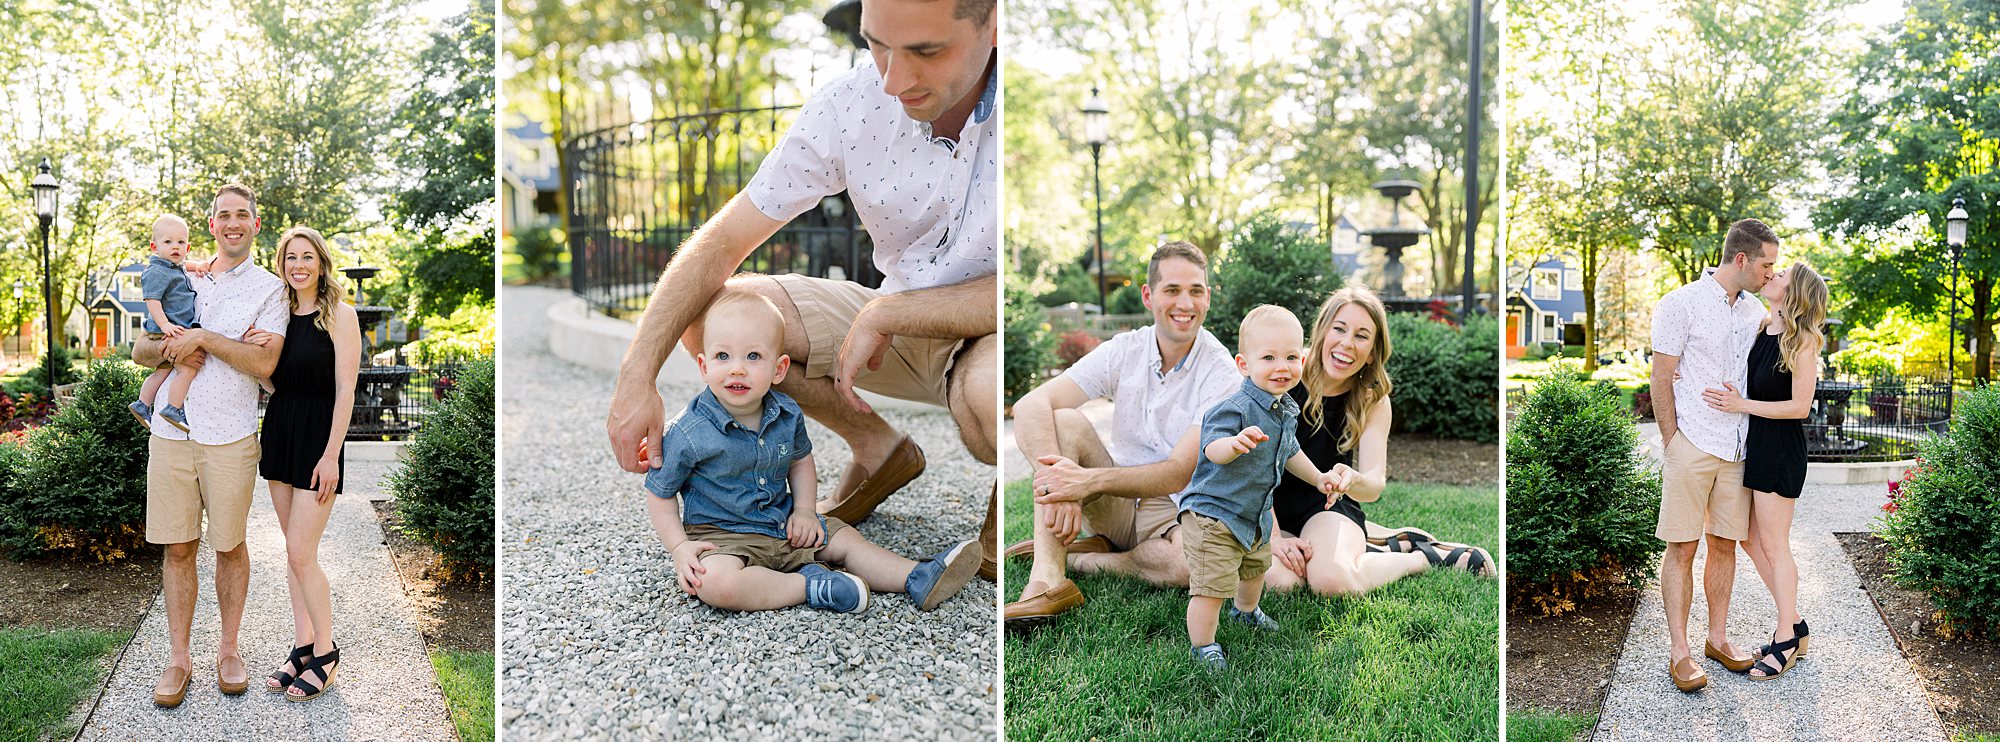 Family photos in downtown Indianapolis with Indy's photographer Jennifer Council.